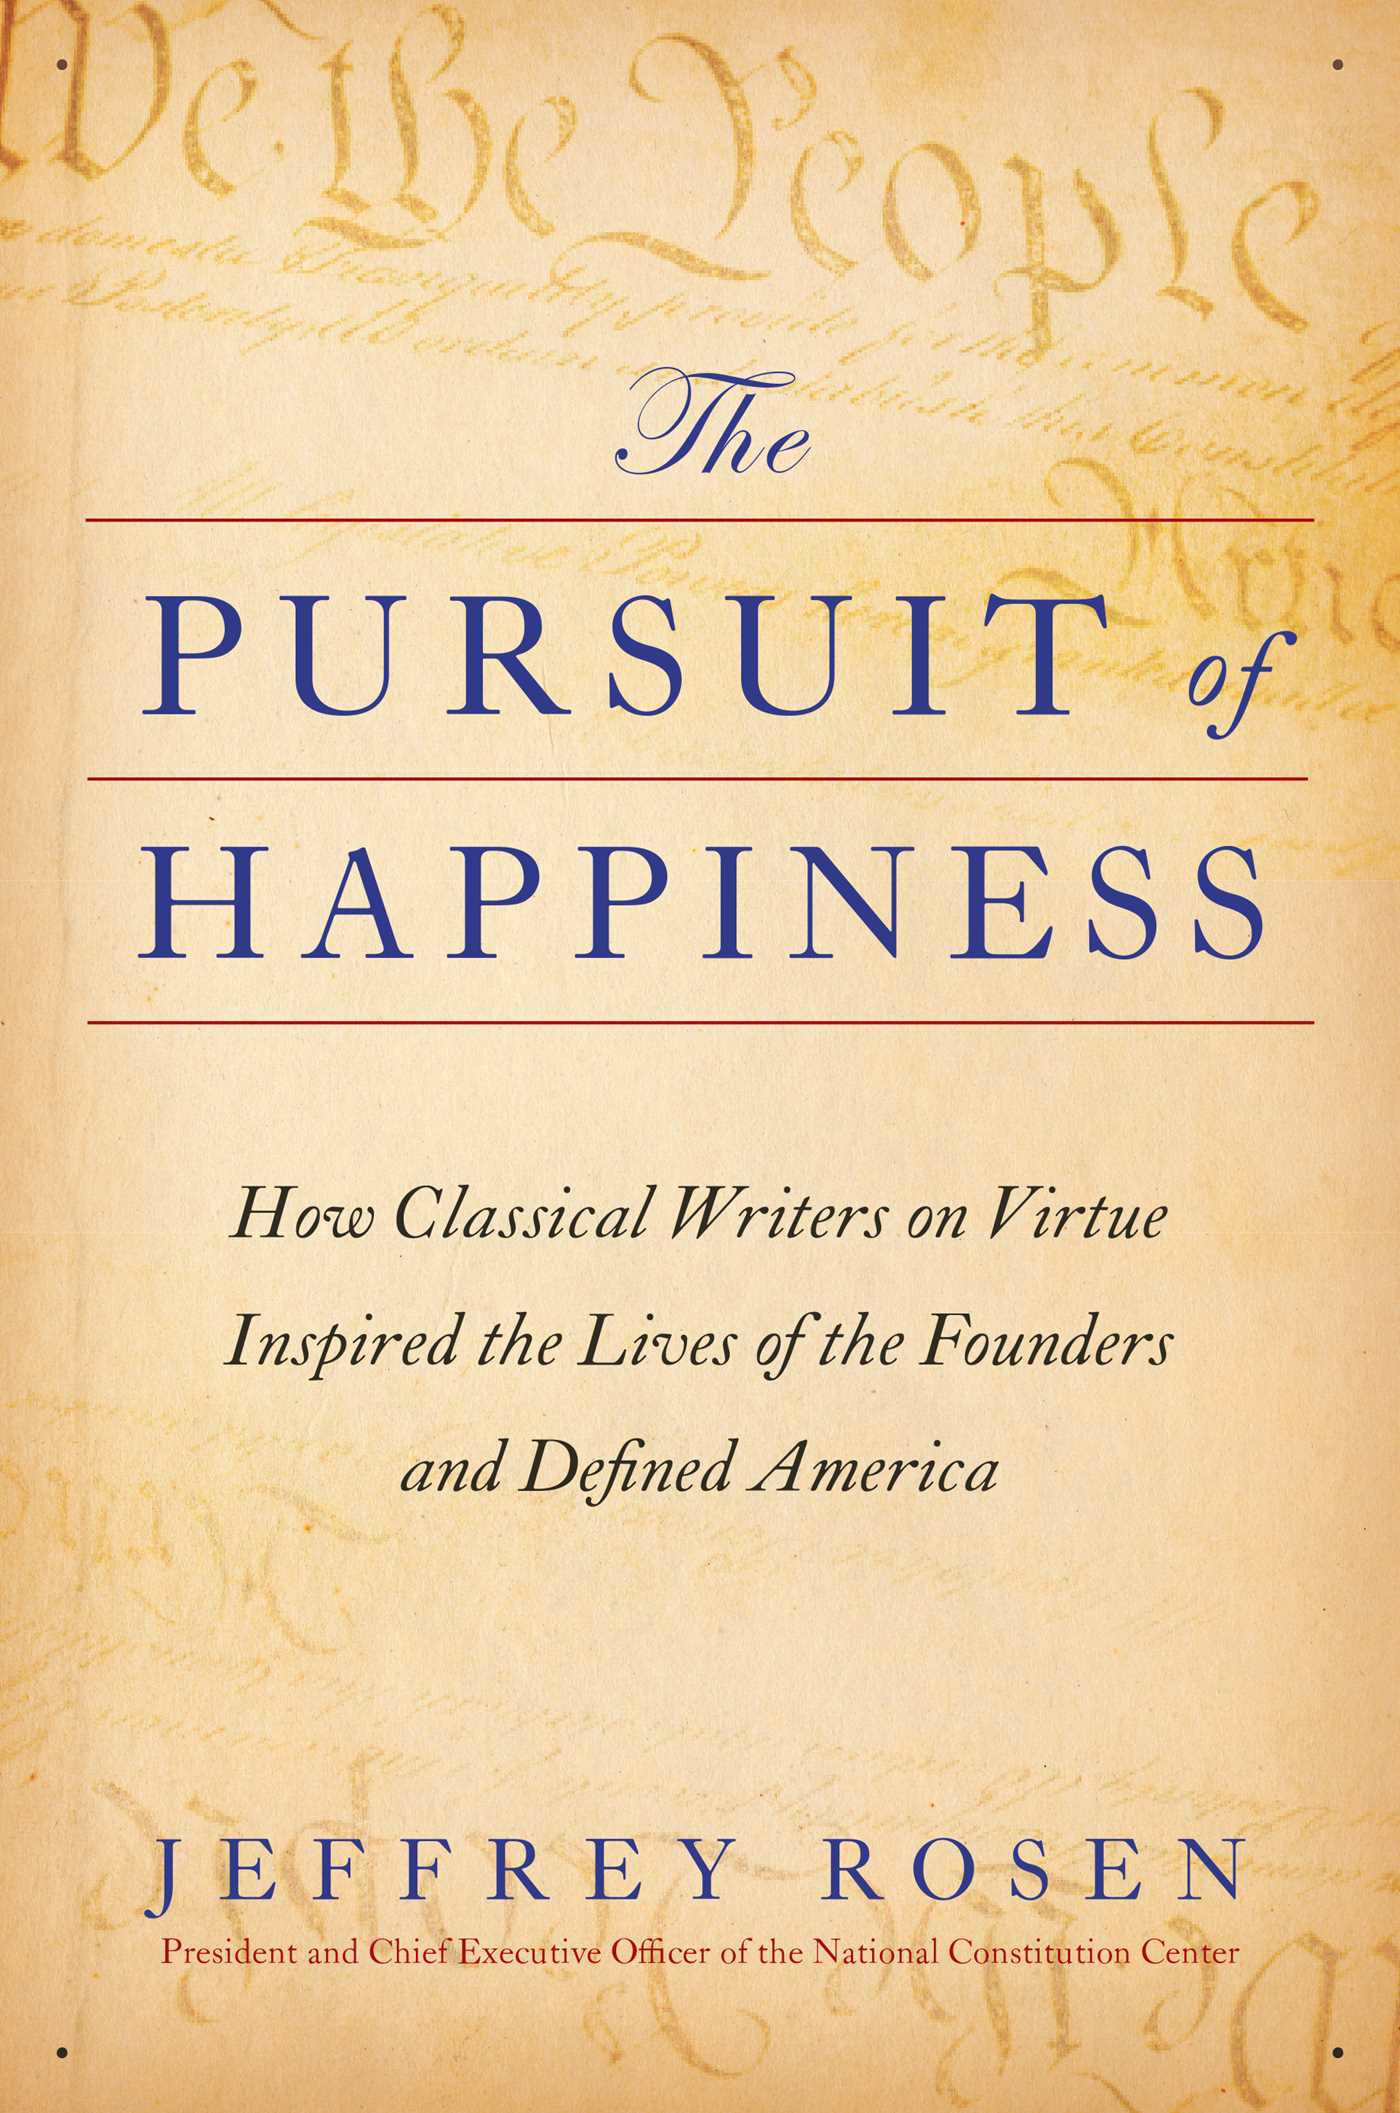 The Pursuit of Happiness, How Classical Writers on Virtue Inspired the Lives of the Founders and Defined America